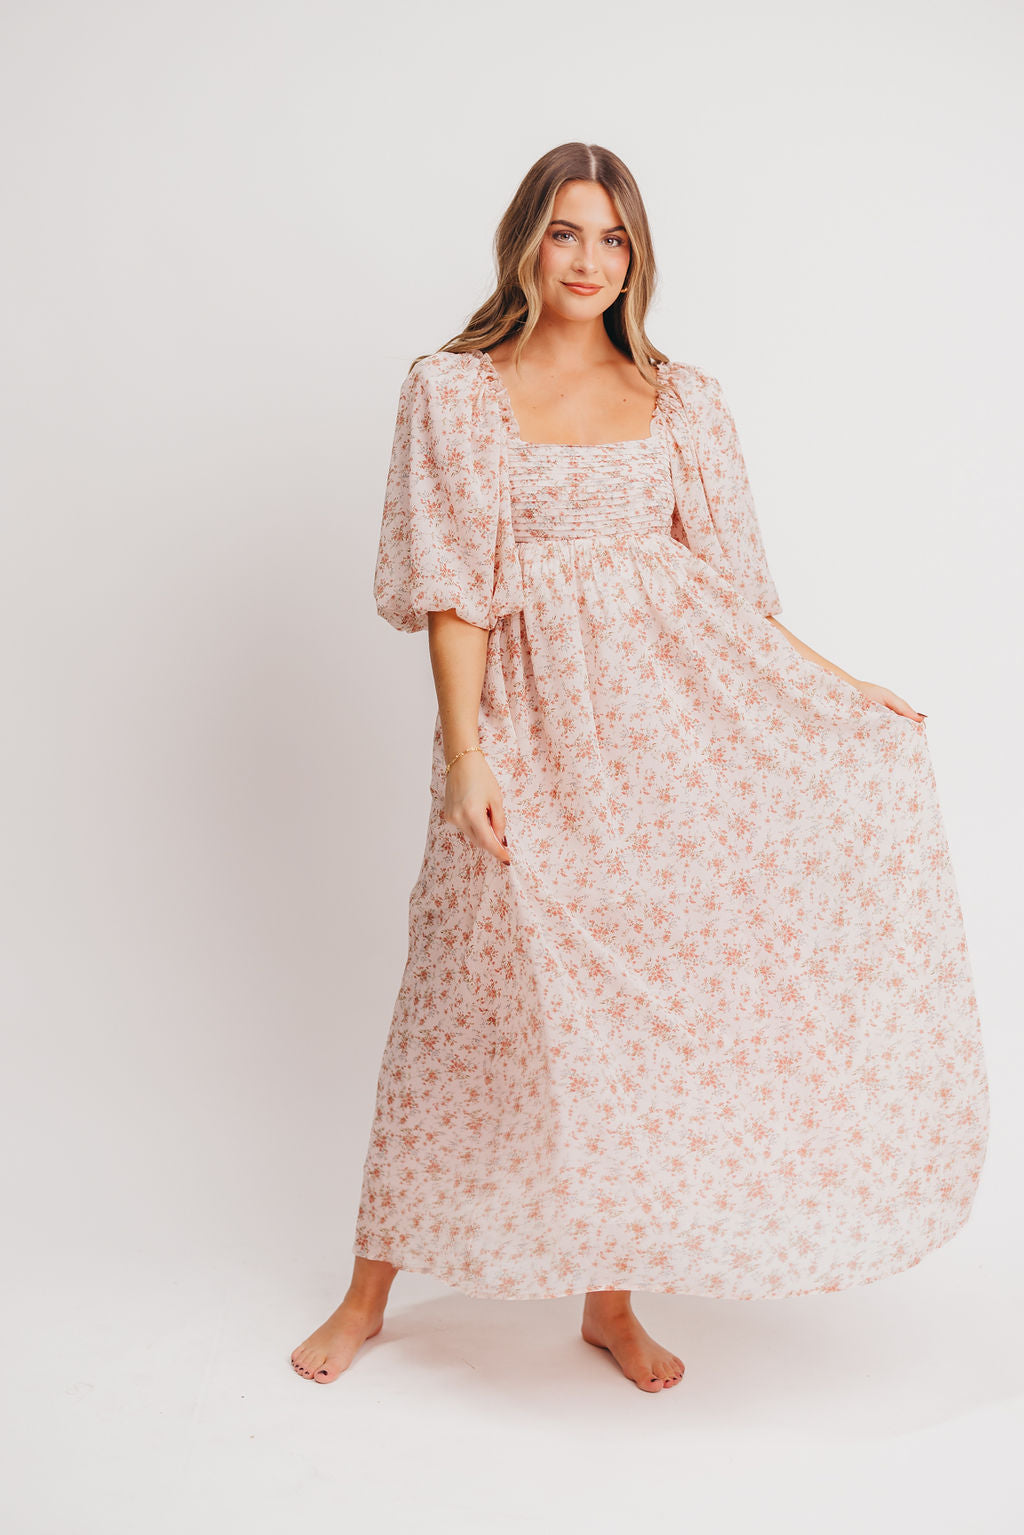 Melody Maxi Dress with Pleats and Bow Detail in Winter Blush - Bump Friendly & Inclusive Sizing (S-3XL)